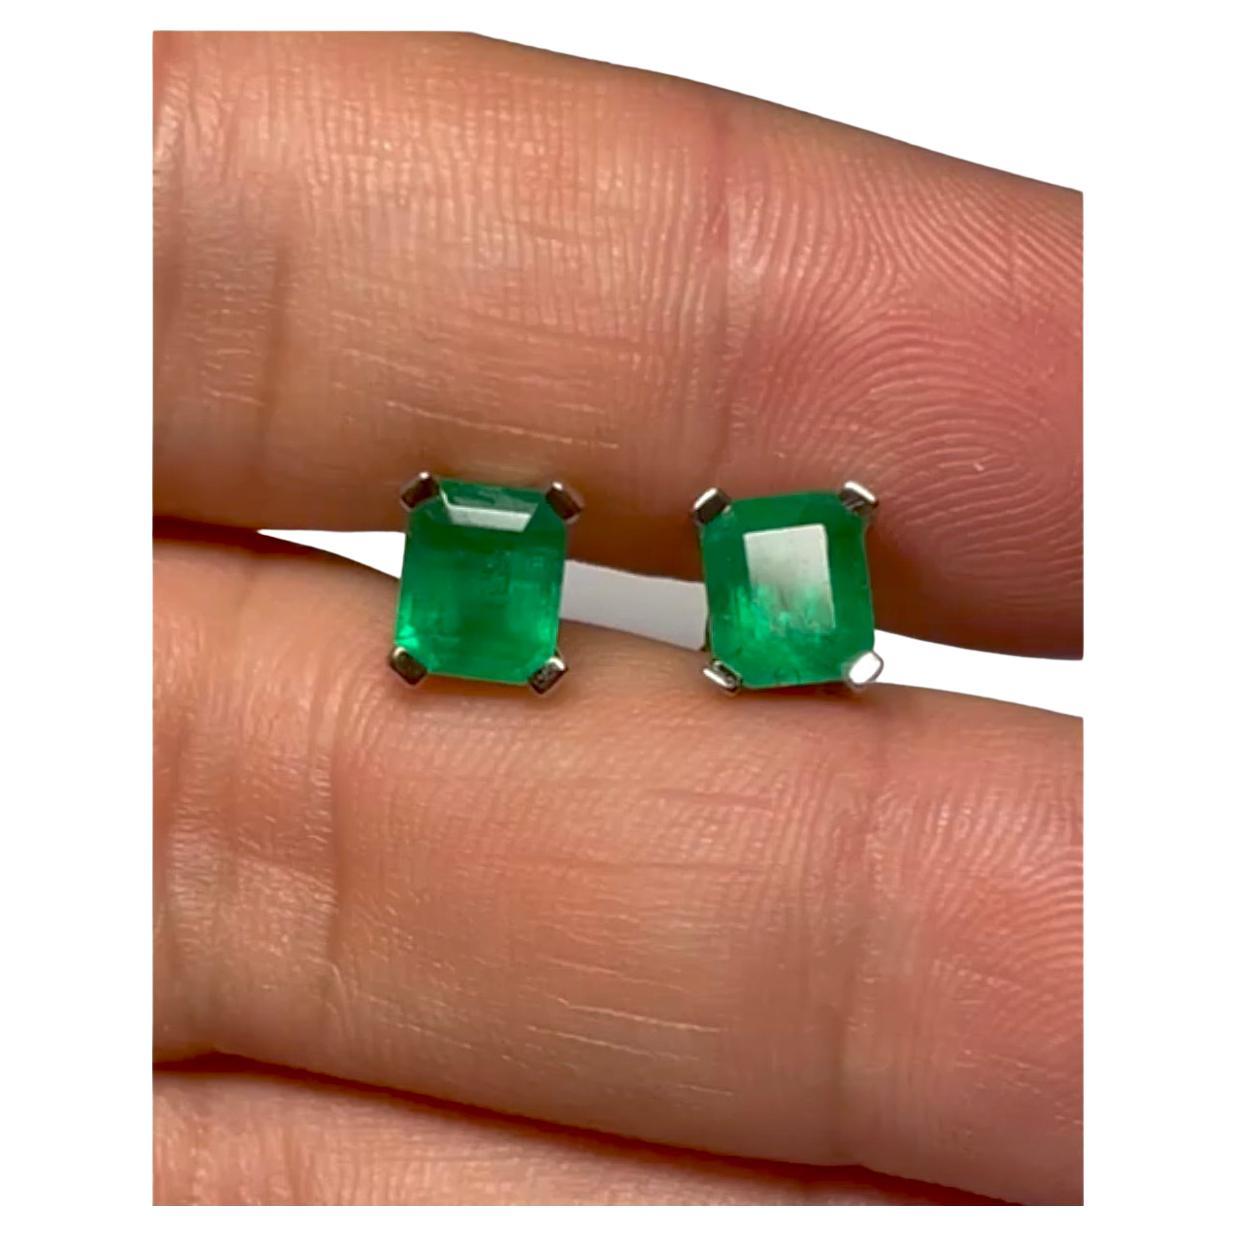 Natural AAA Colombian emeralds emerald cut gemstone stud earrings prong set. These 18k gold stud earrings are hand-made by our expert jeweler and sparkle with a total weight of 2.09 Carats The emeralds have AAA+ intense green color(best color).